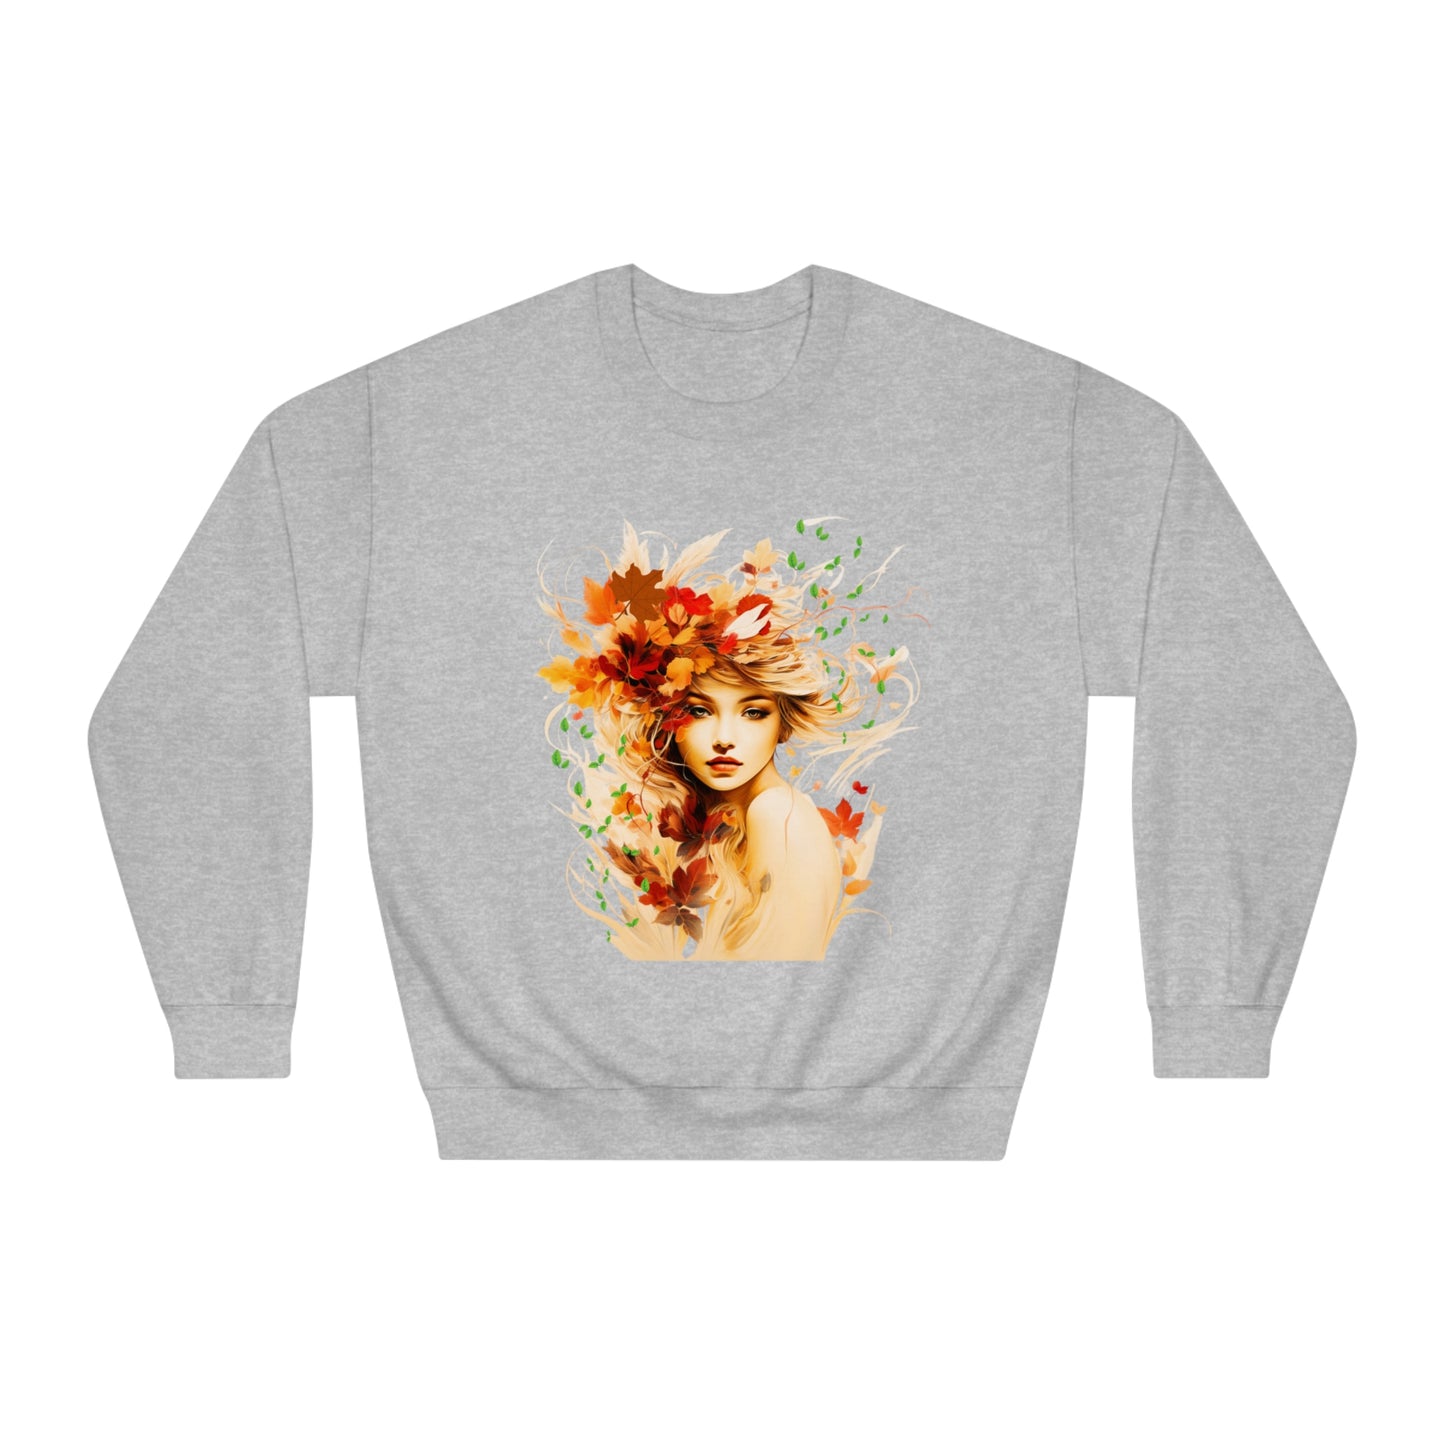 Whimsical Dreams in Autumn Hues: Romantic Dreamy Female Surrounded by Autumn Leaves Sweatshirt - Fairycore, Forestcore, Cottagecore-inspired Fashion Sweatshirt Sport Grey S 